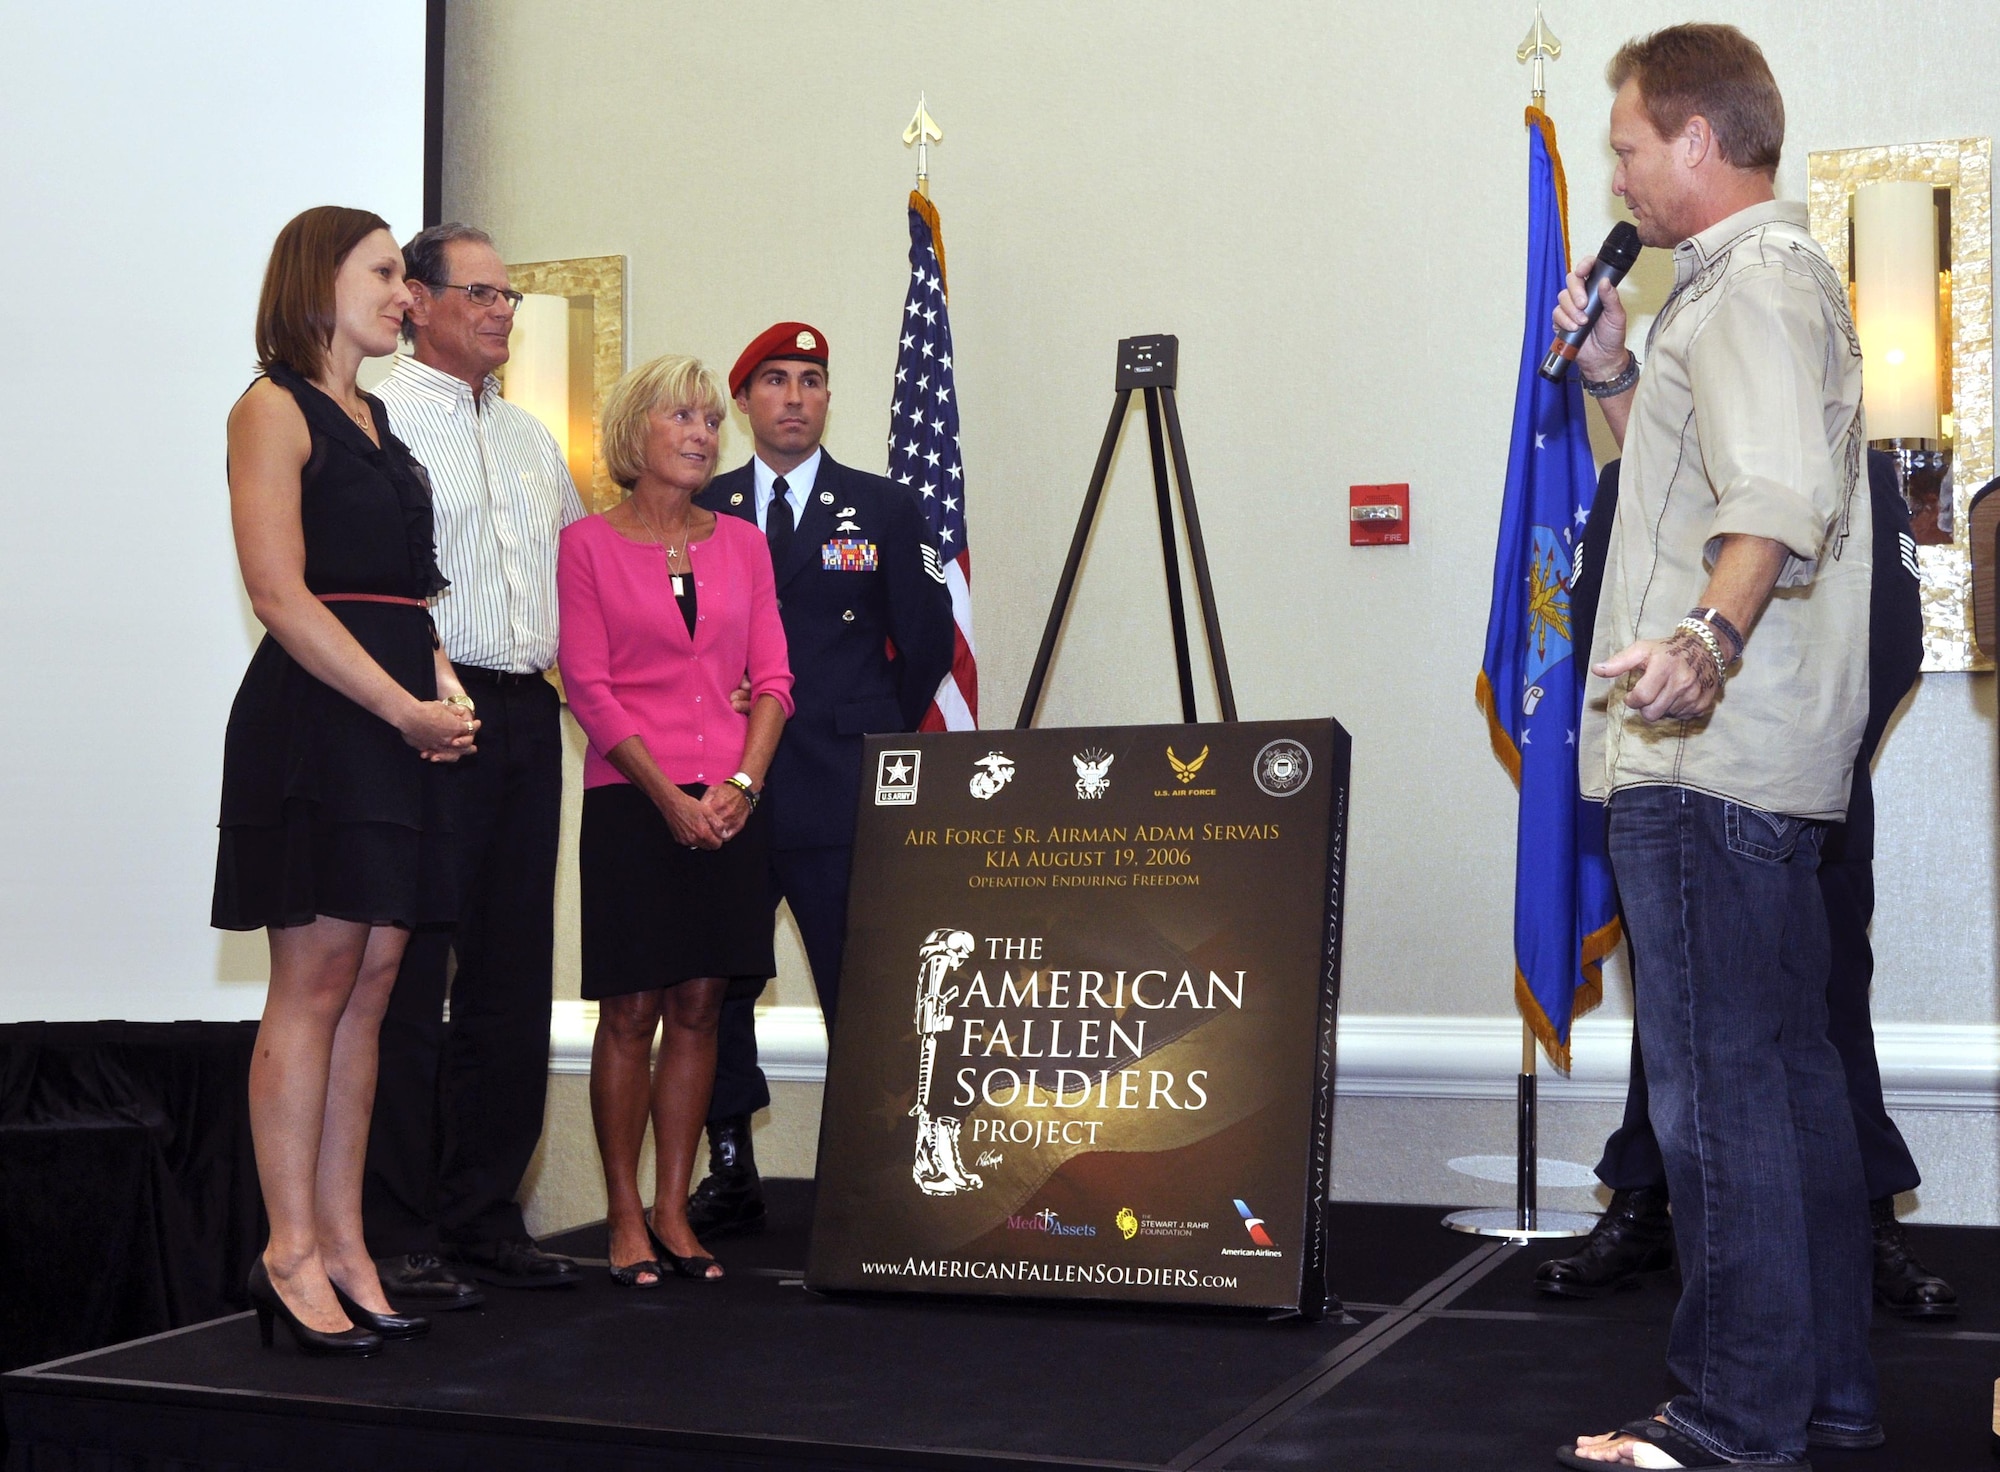 Artist Phil Taylor speaks to the family of Senior Airman Adam Servais before presenting the portrait honoring his service Oct. 19, 2013, in Destin, Fla. Servais was killed in action Aug. 19, 2006, while deployed to Afghanistan as a 23rd Special Tactics Squadron combat controller.